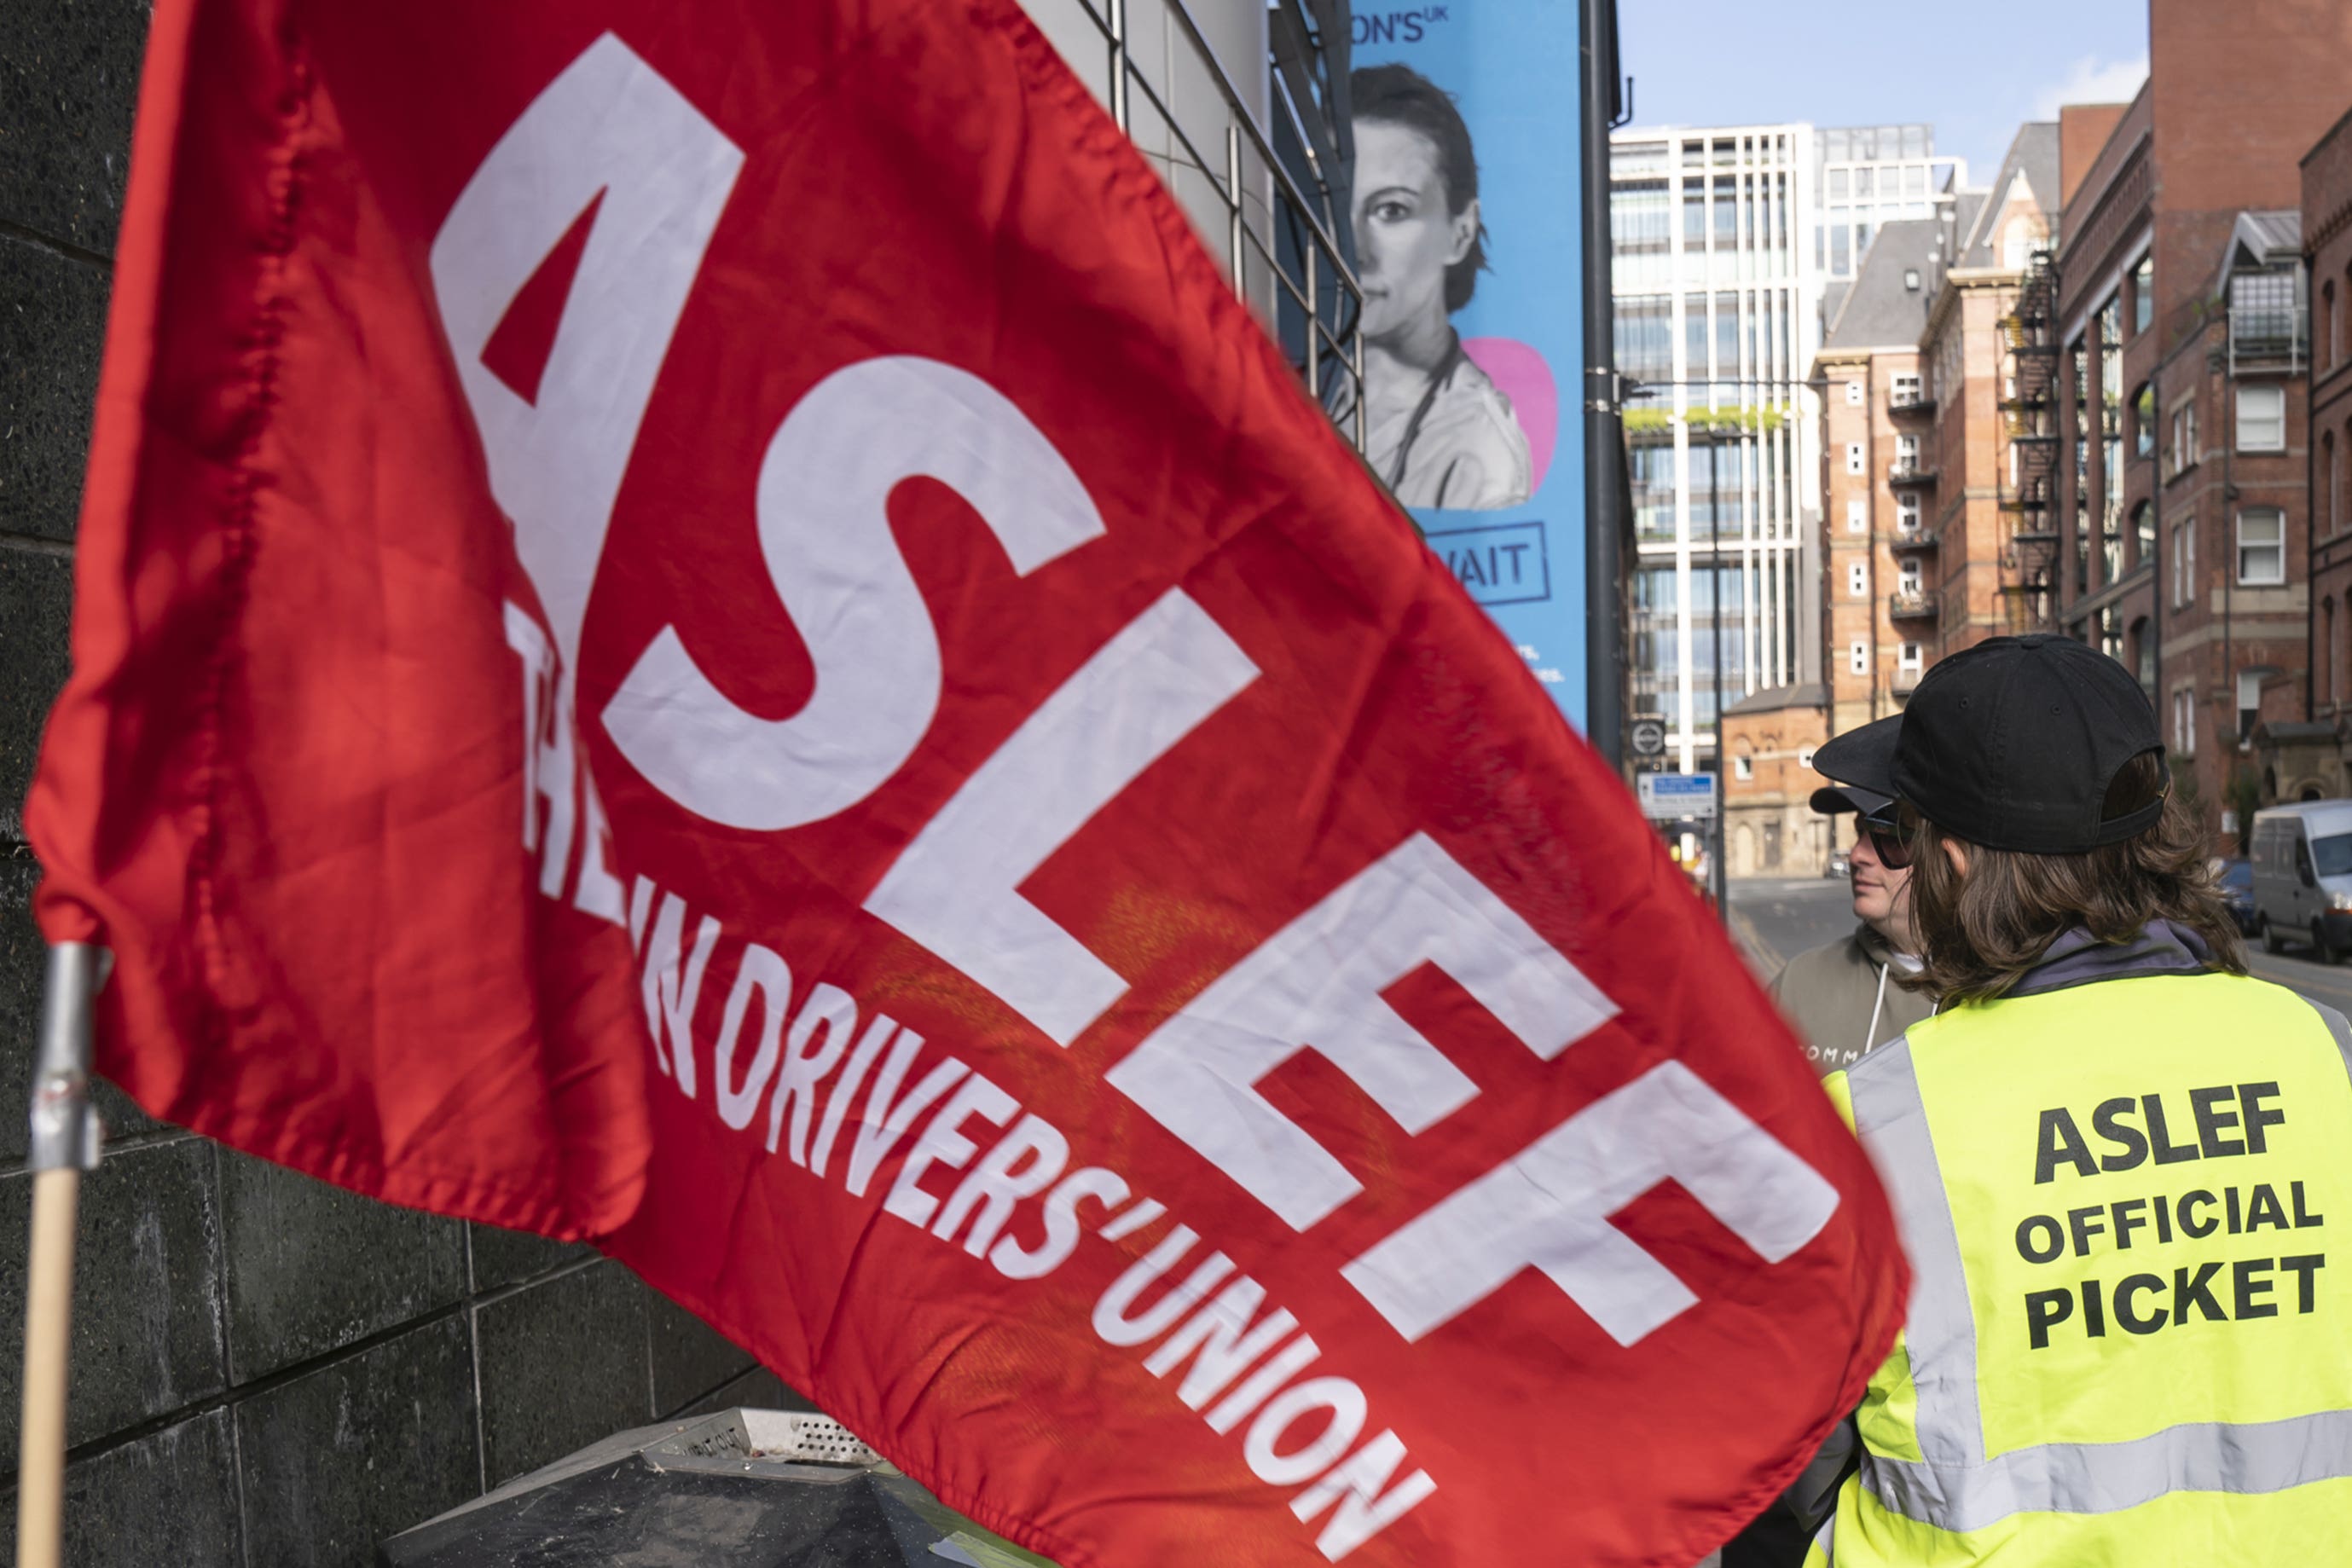 Aslef has announced a round of strikes this week